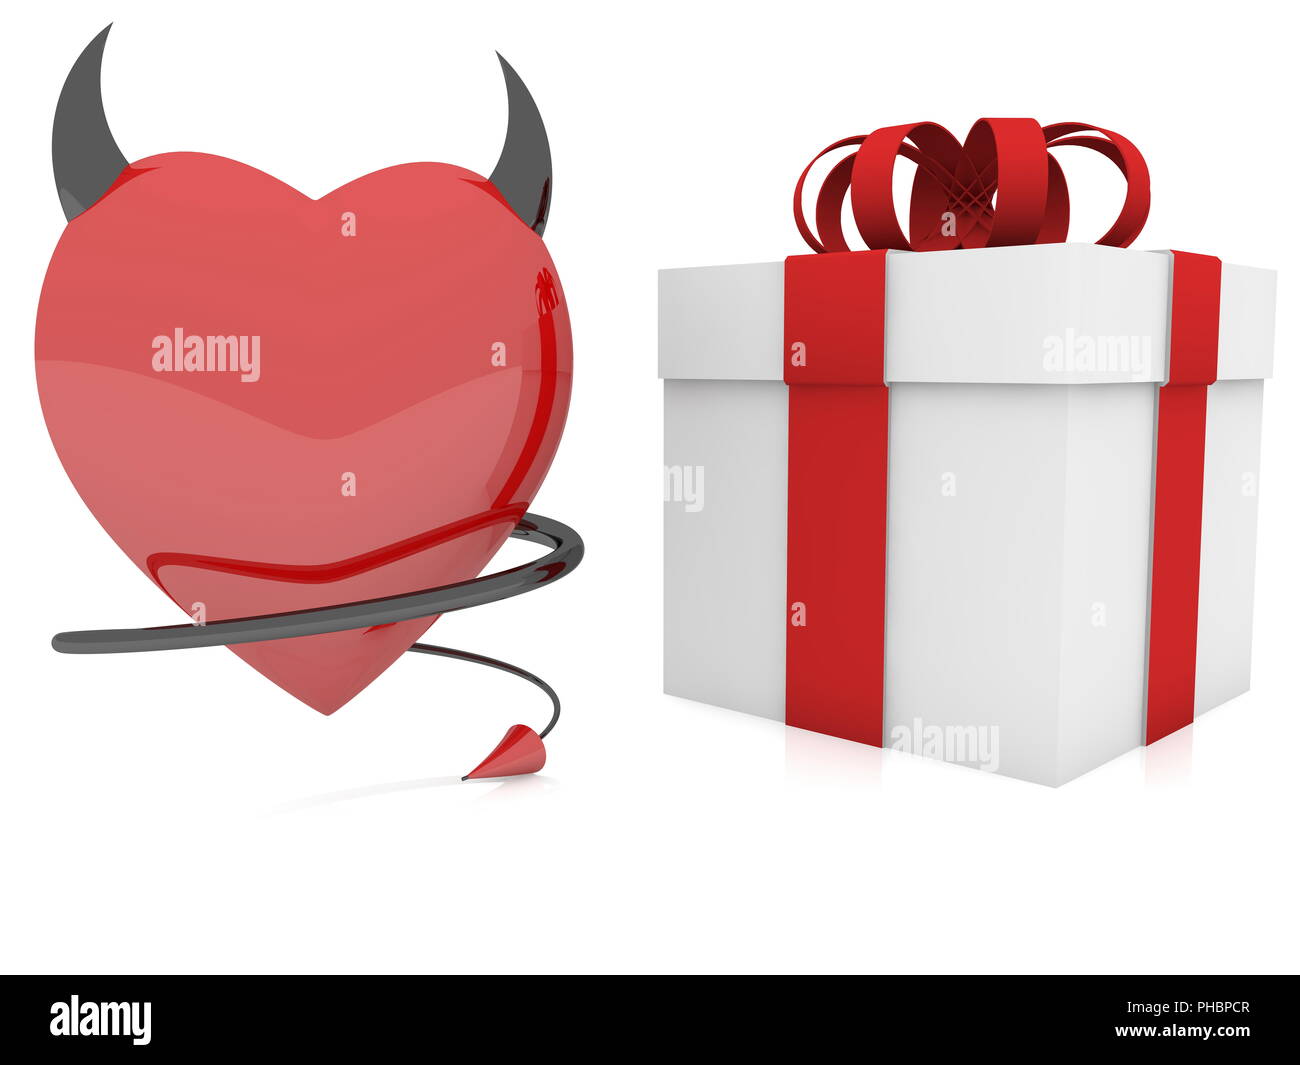 Devil red heart with horn and tail near gift box Stock Photo - Alamy